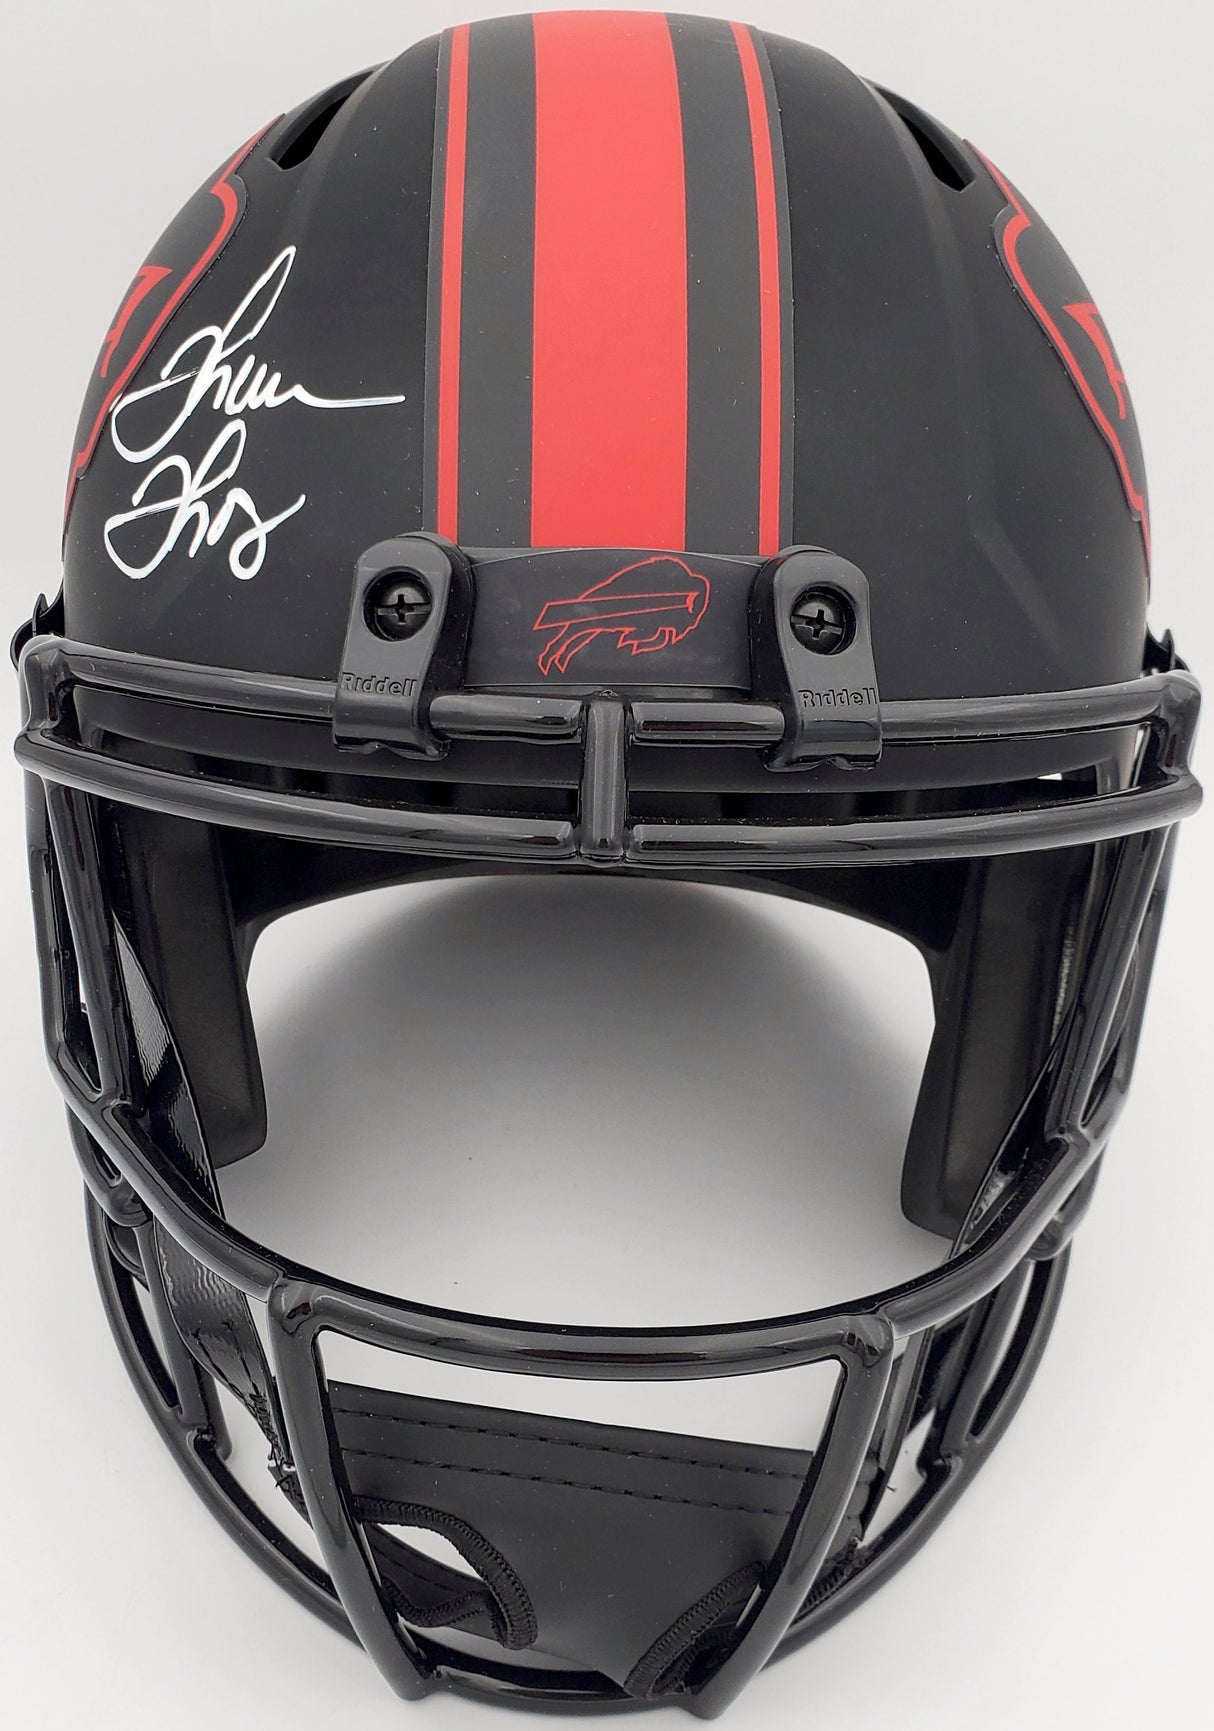 Buffalo Bills Team Greats Autographed Eclipse Black Speed Replica Full Size Helmet With 3 Signatures Including Jim Kelly, Thurman Thomas & Andre Reed Beckett BAS Stock #185864